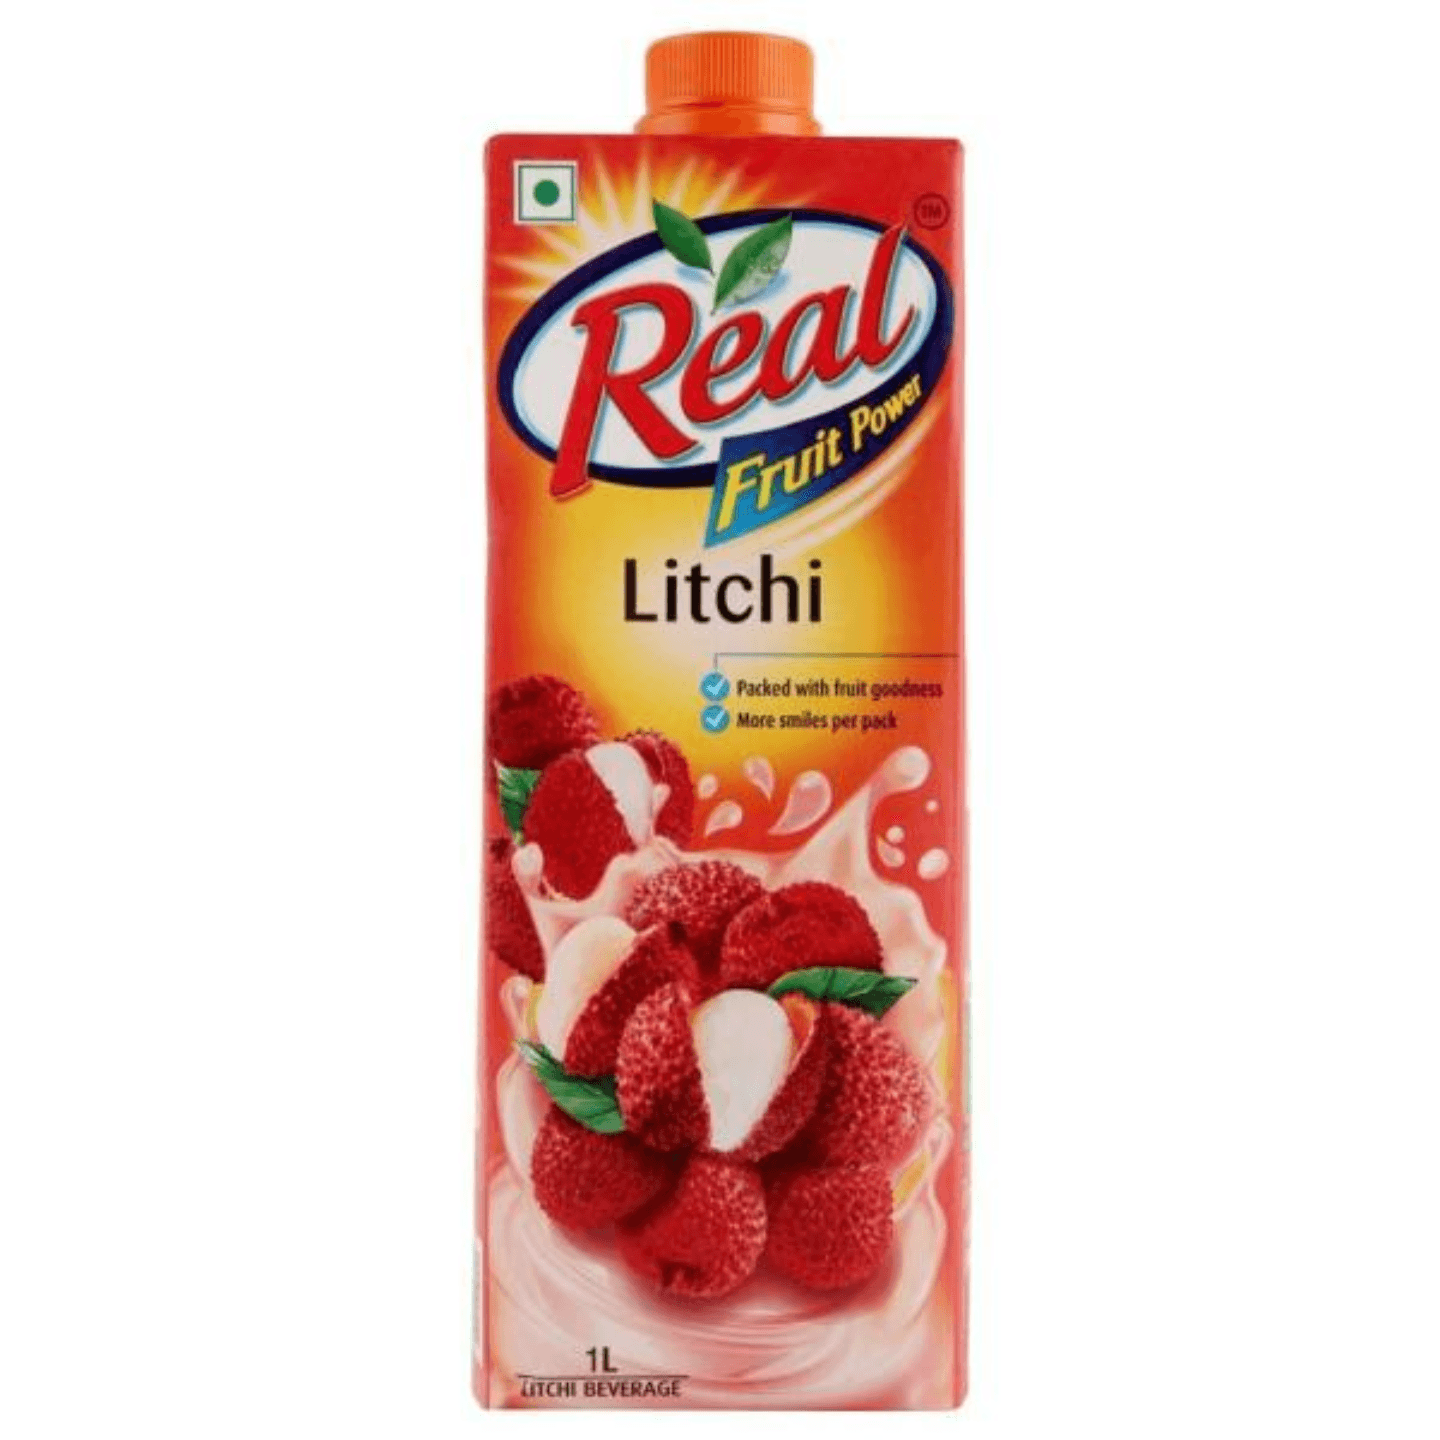 Real Fruit Power Litchi Nectar 1 L